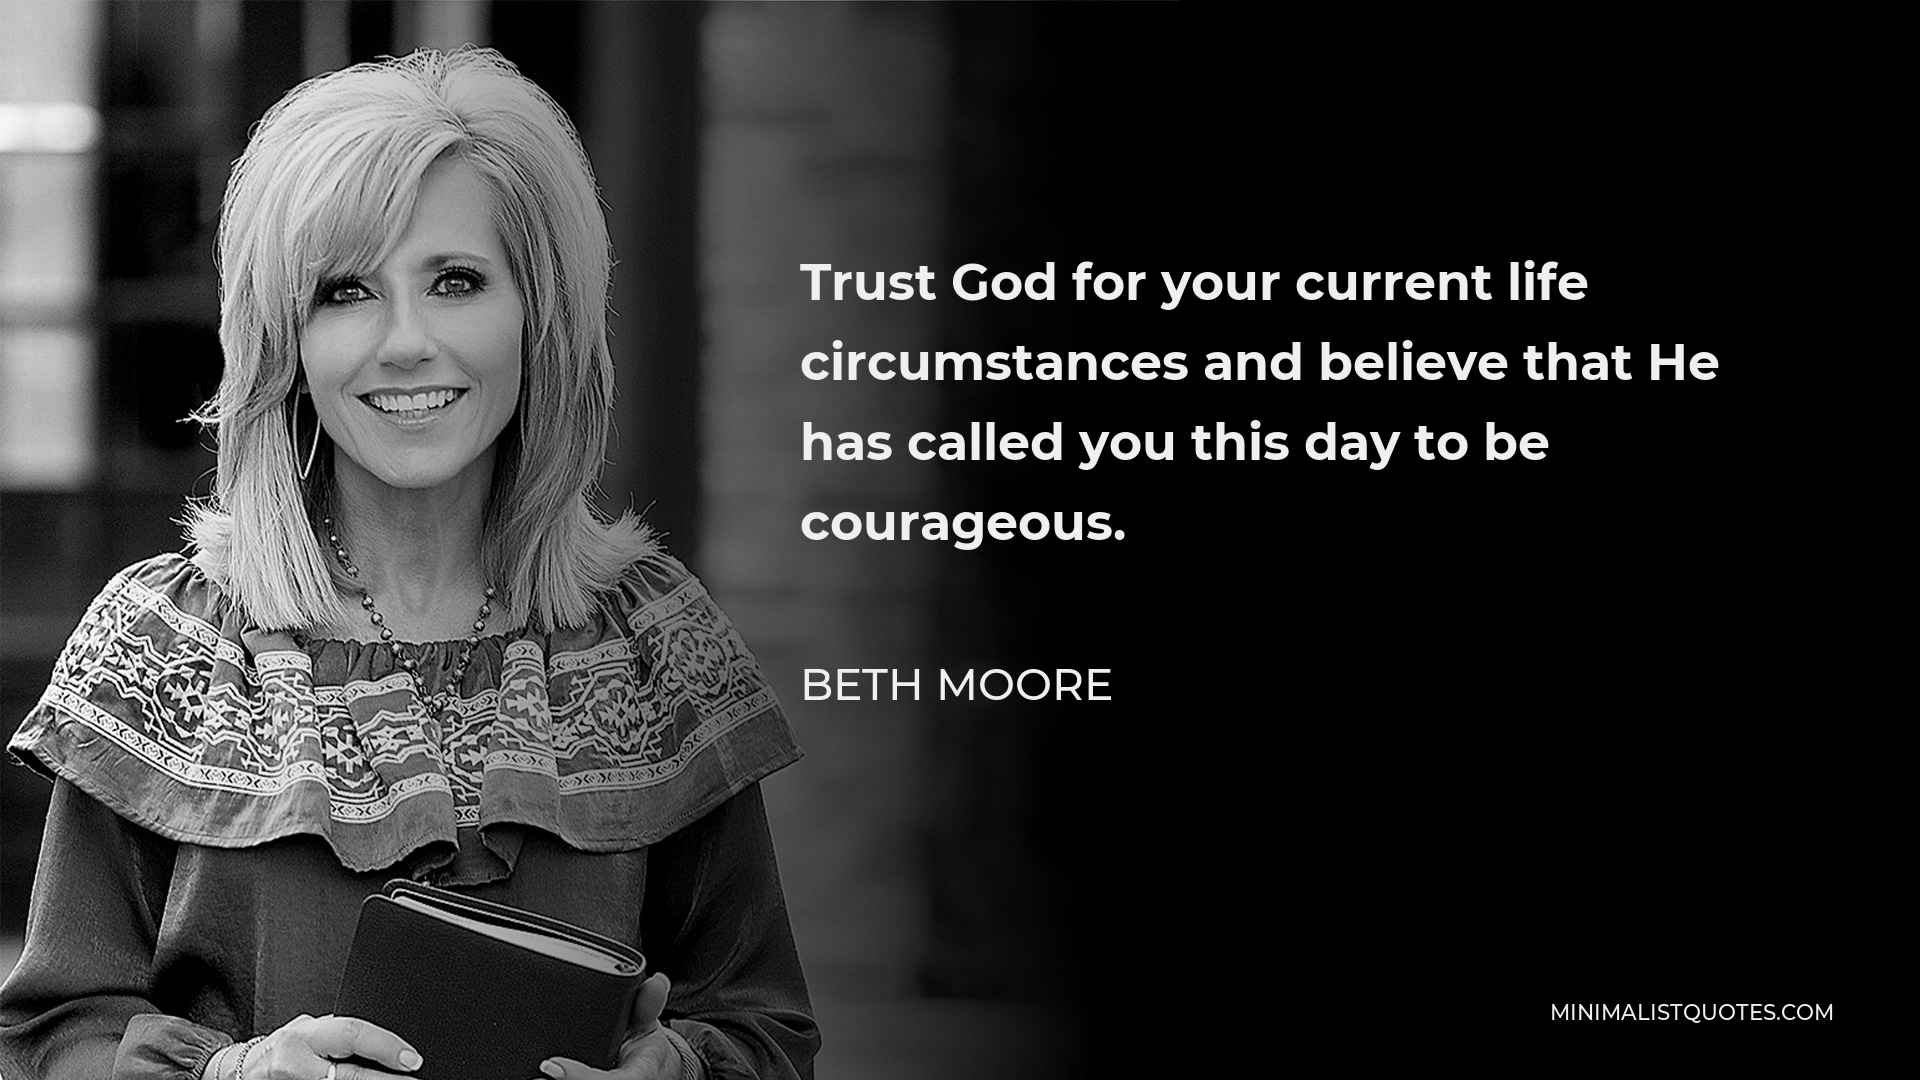 Beth Moore Quote - Trust God for your current life circumstances and believe that He has called you this day to be courageous.